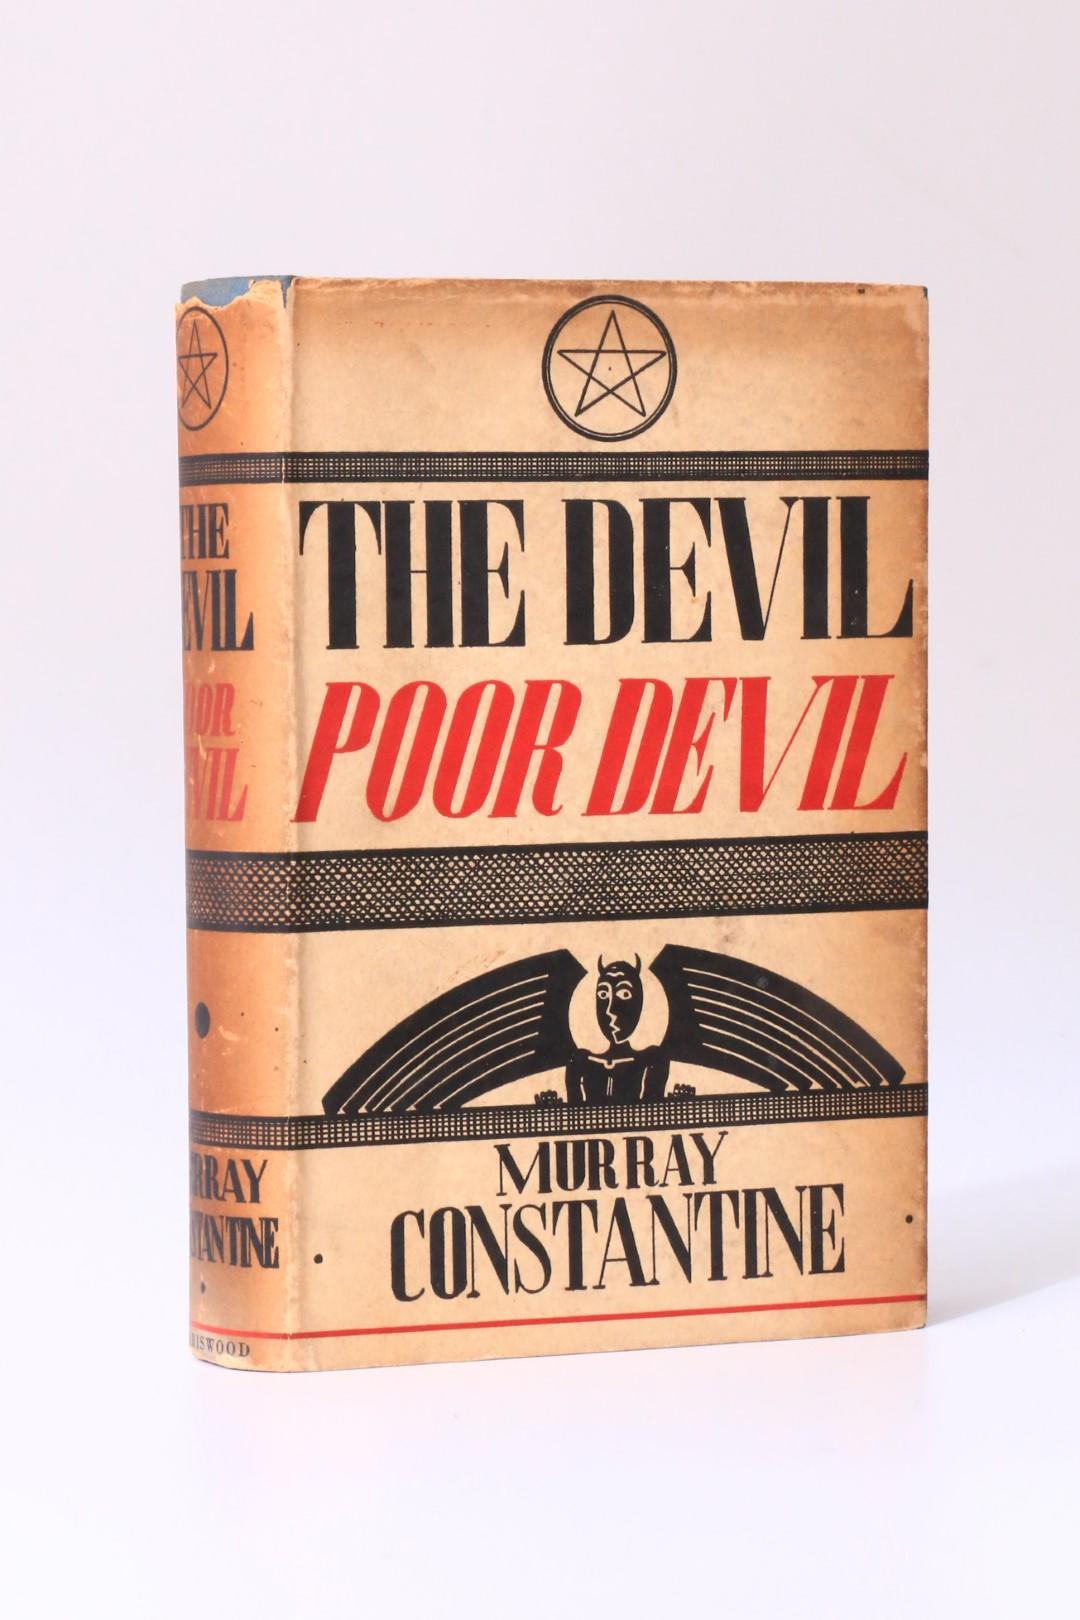 Murray Constantine - The Devil, Poor Devil - Boriswood, 1934, First Edition.